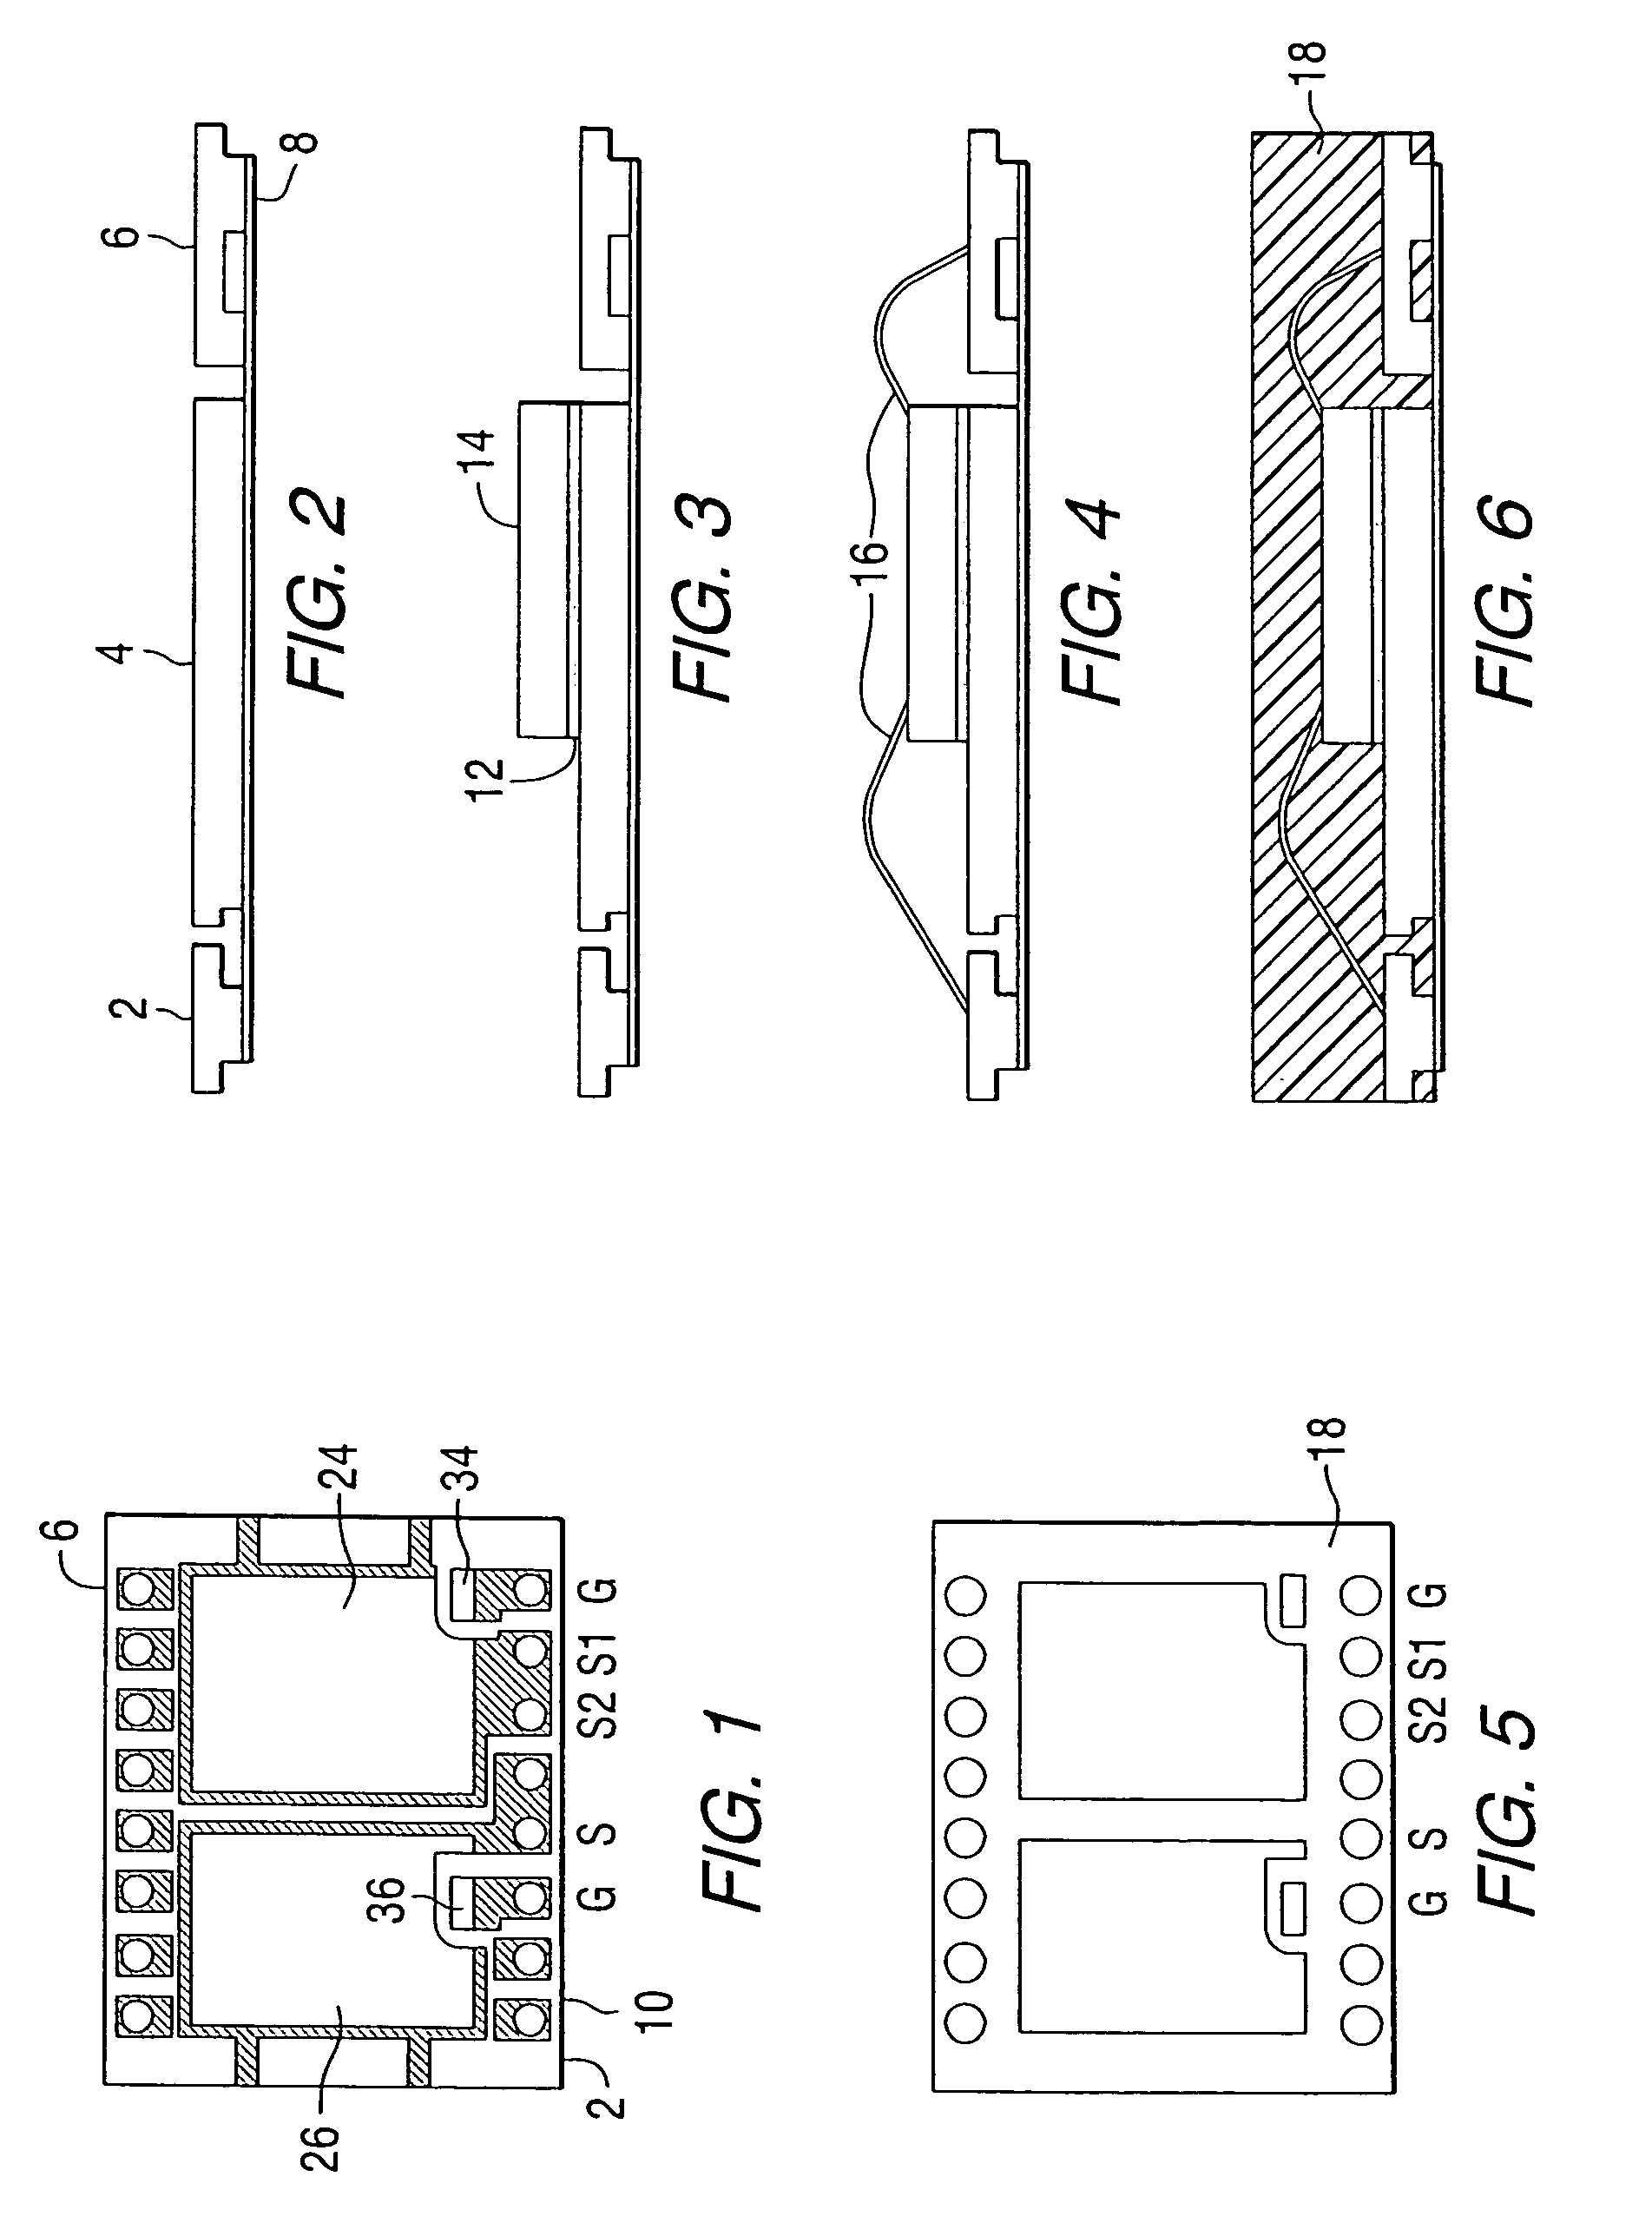 Multi-flip chip on lead frame on over molded IC package and method of assembly